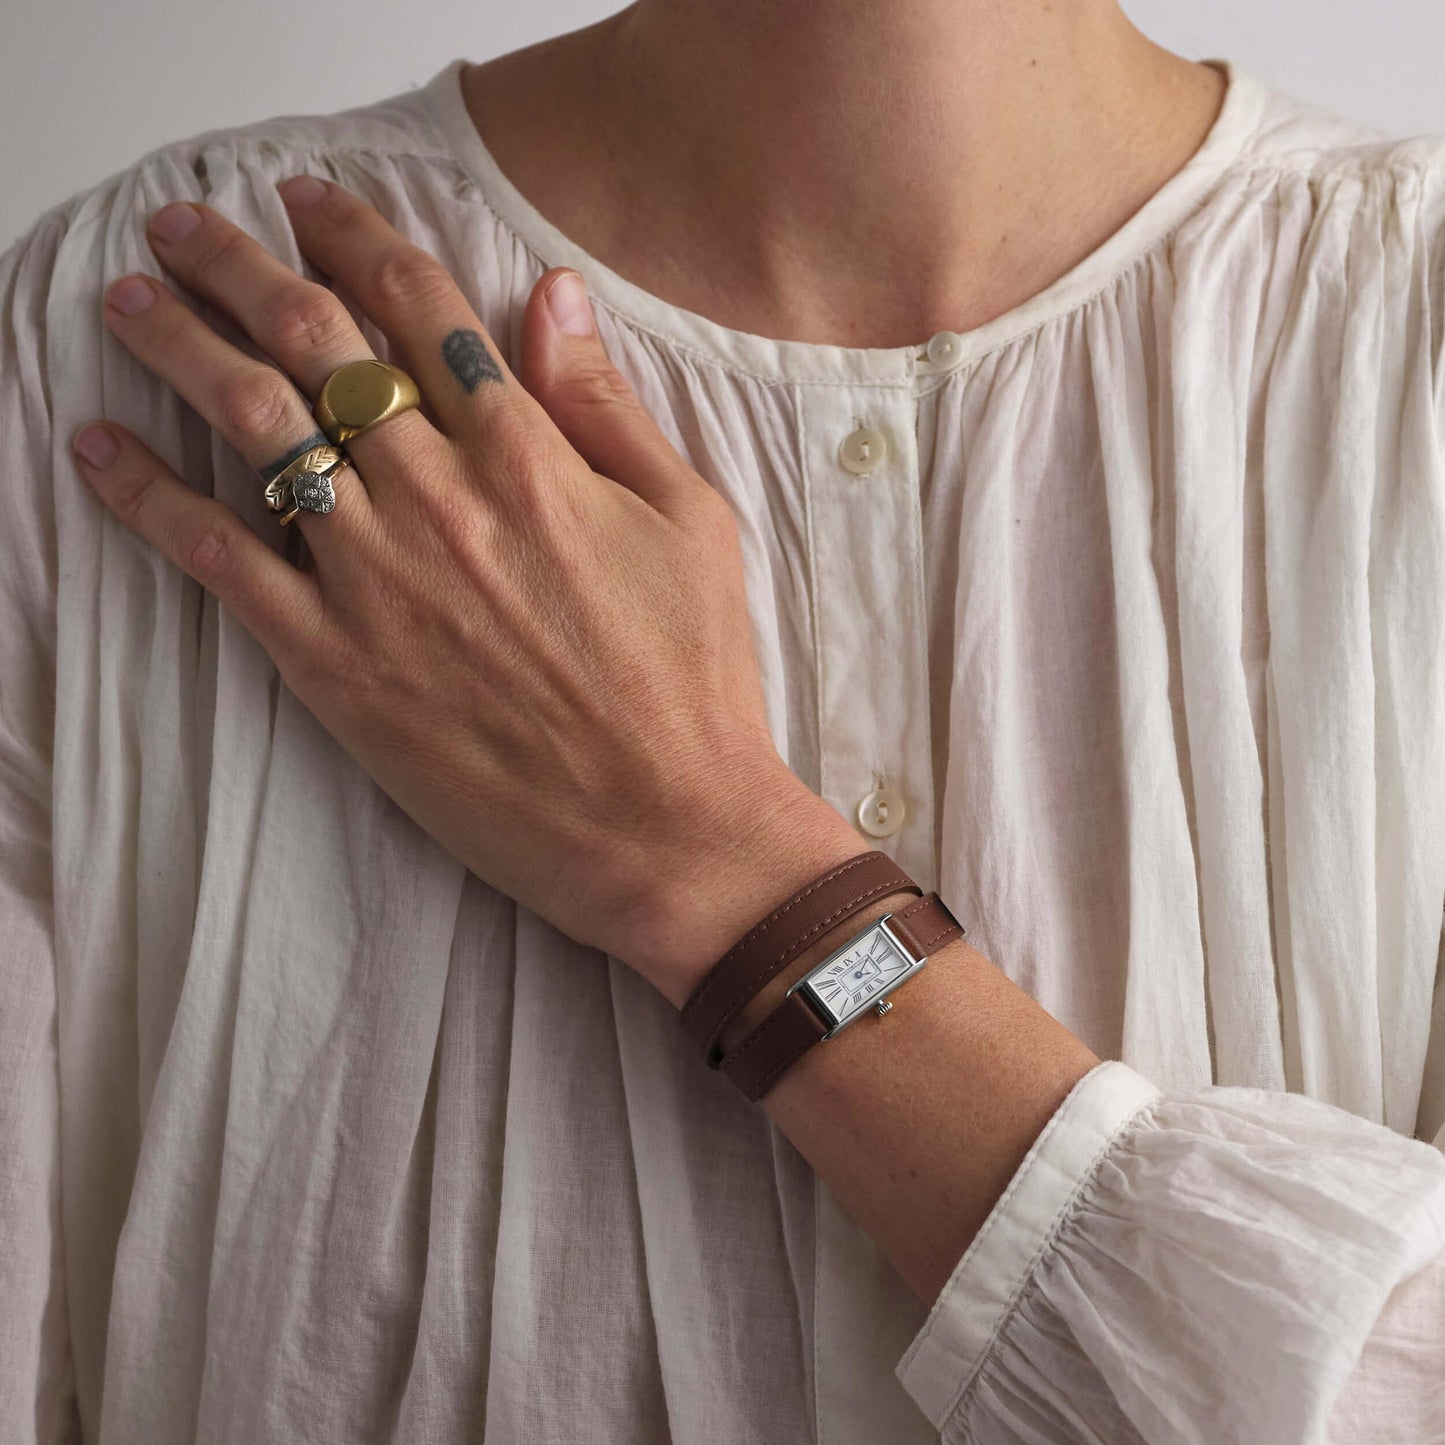 Woman wearing white shirt and Kimsey Watch in Brown Leather “Double Wrap” Strap and silver hardware